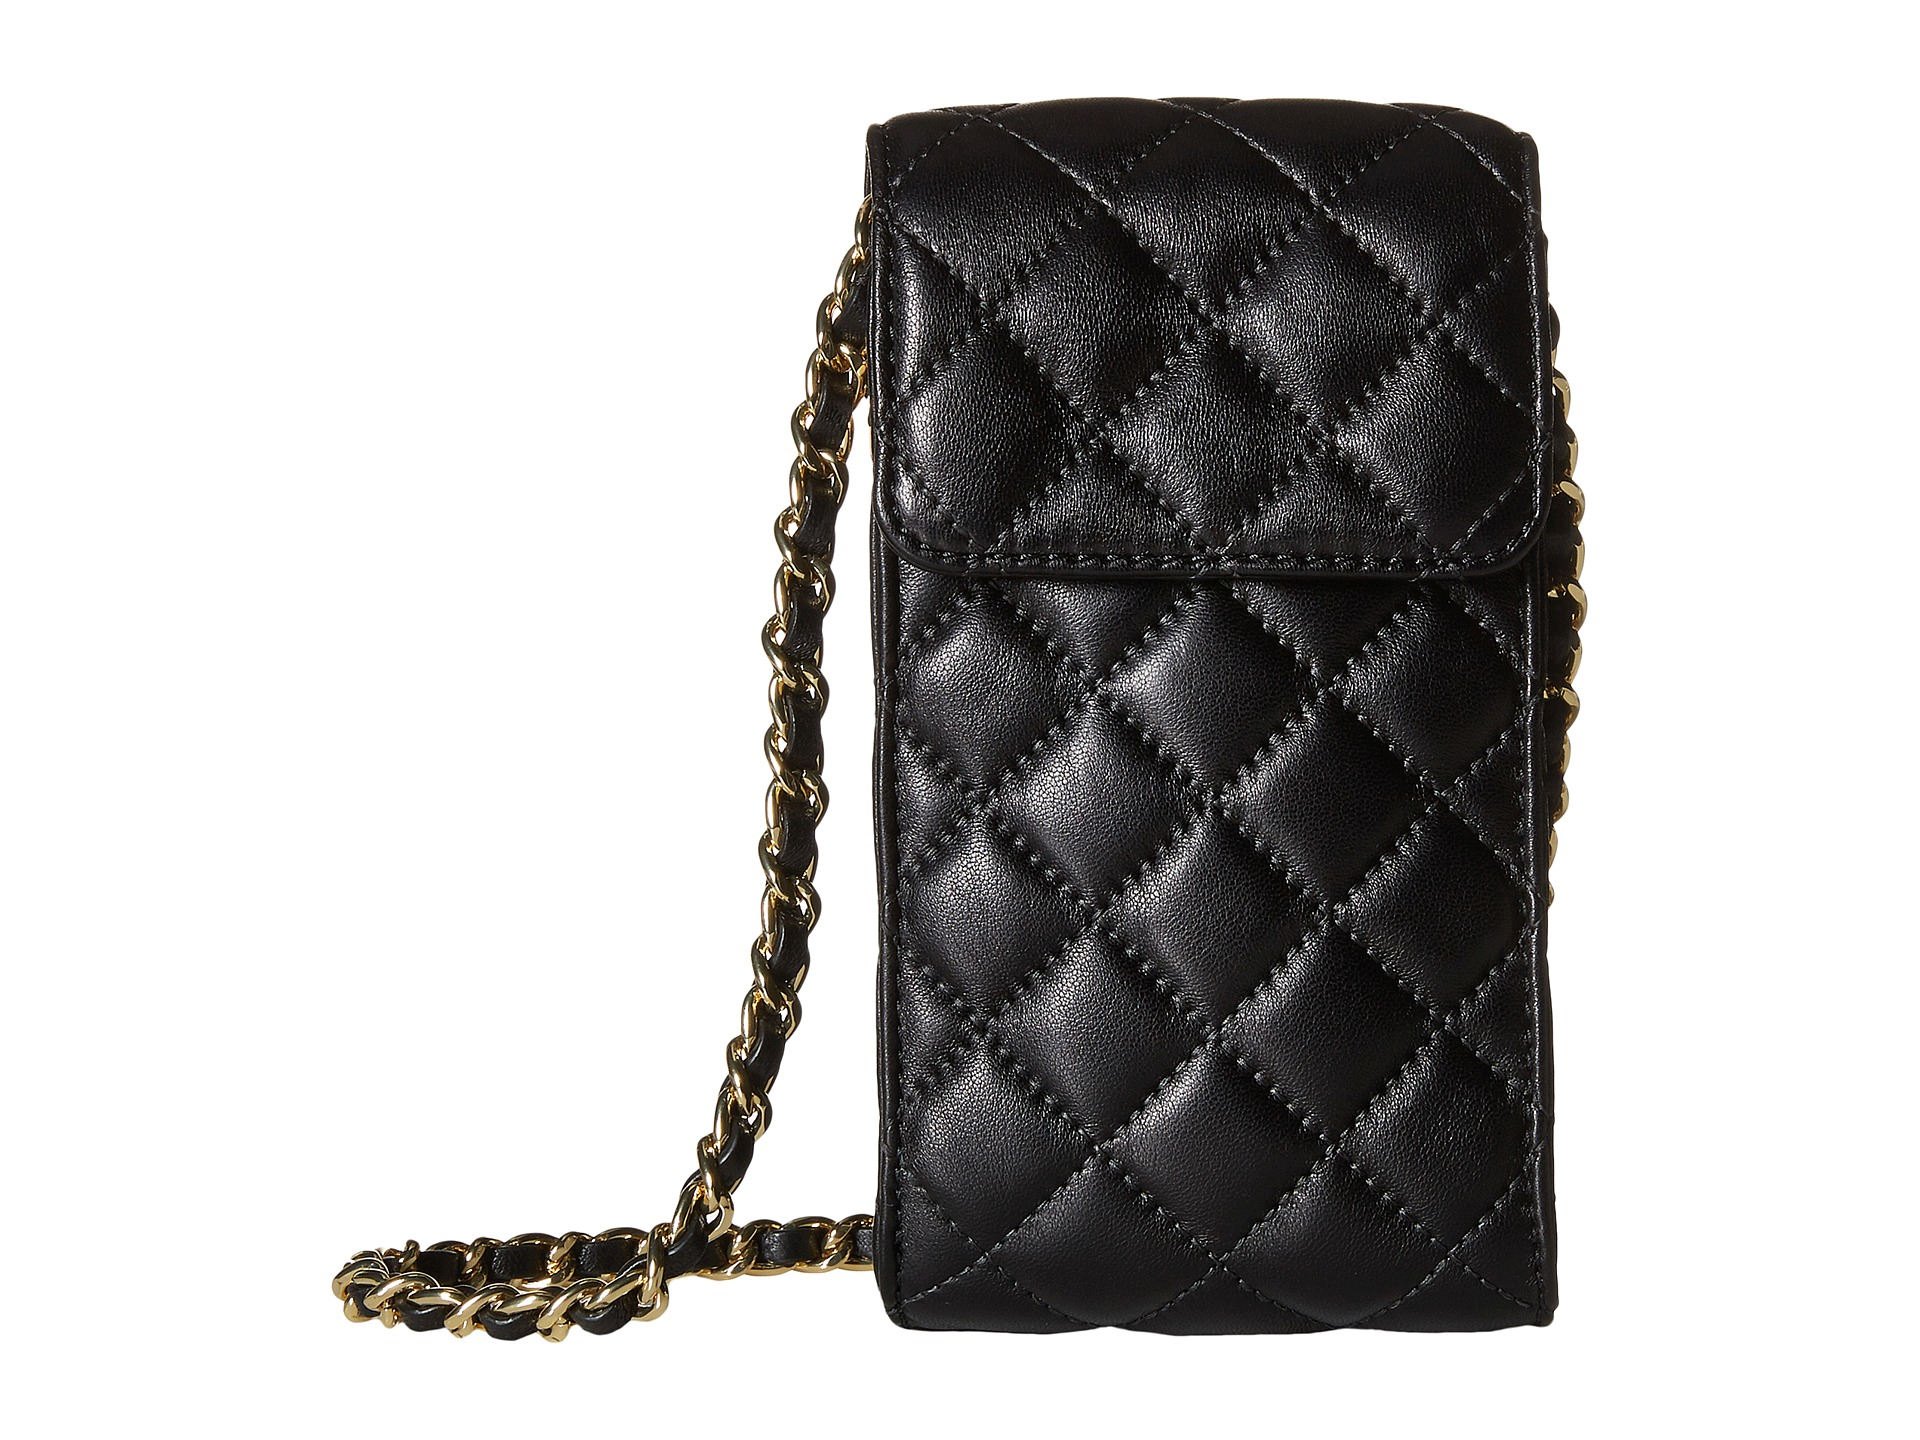 MICHAEL MICHAEL KORS Michael Michael Kors Sloan Phone Quilted Chain Crossbody  Bag, Black. #mi…